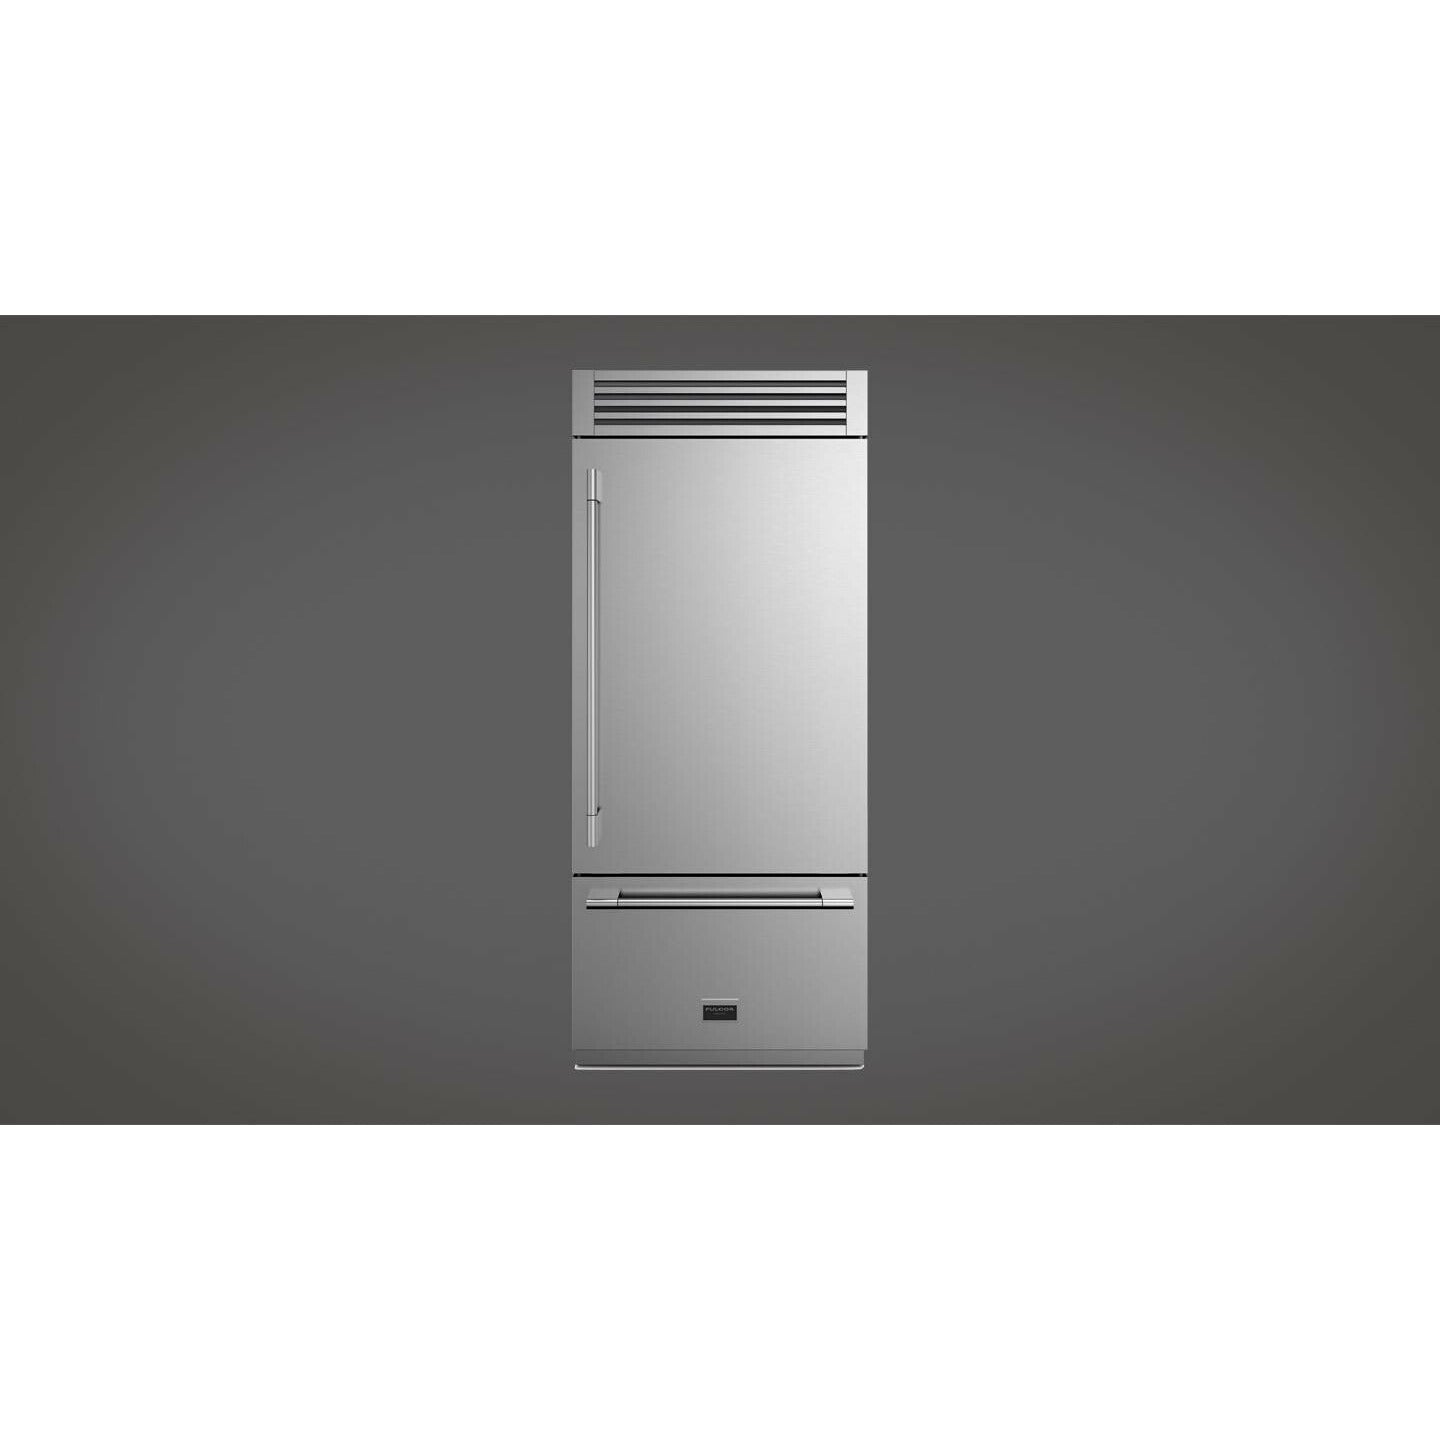 Fulgor Milano 36" Built-In Bottom Mount Refrigerator with 18.5 Cu. Ft. Capacity, Stainless Steel - F7PBM36S1 Refrigerators F7PBM36S1-L Luxury Appliances Direct